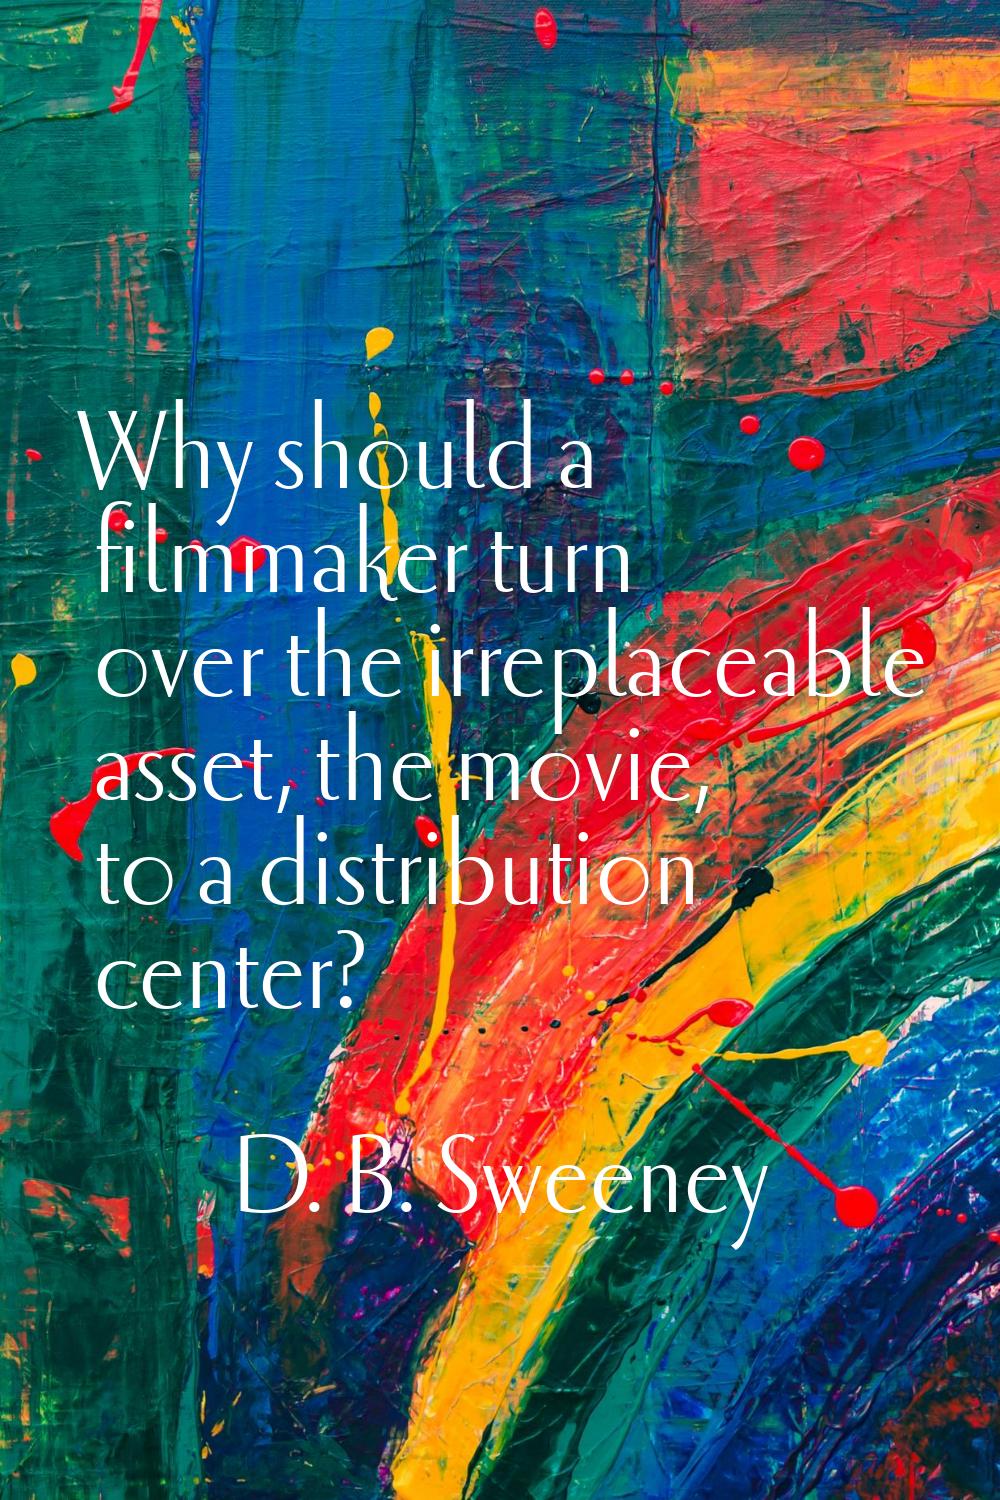 Why should a filmmaker turn over the irreplaceable asset, the movie, to a distribution center?